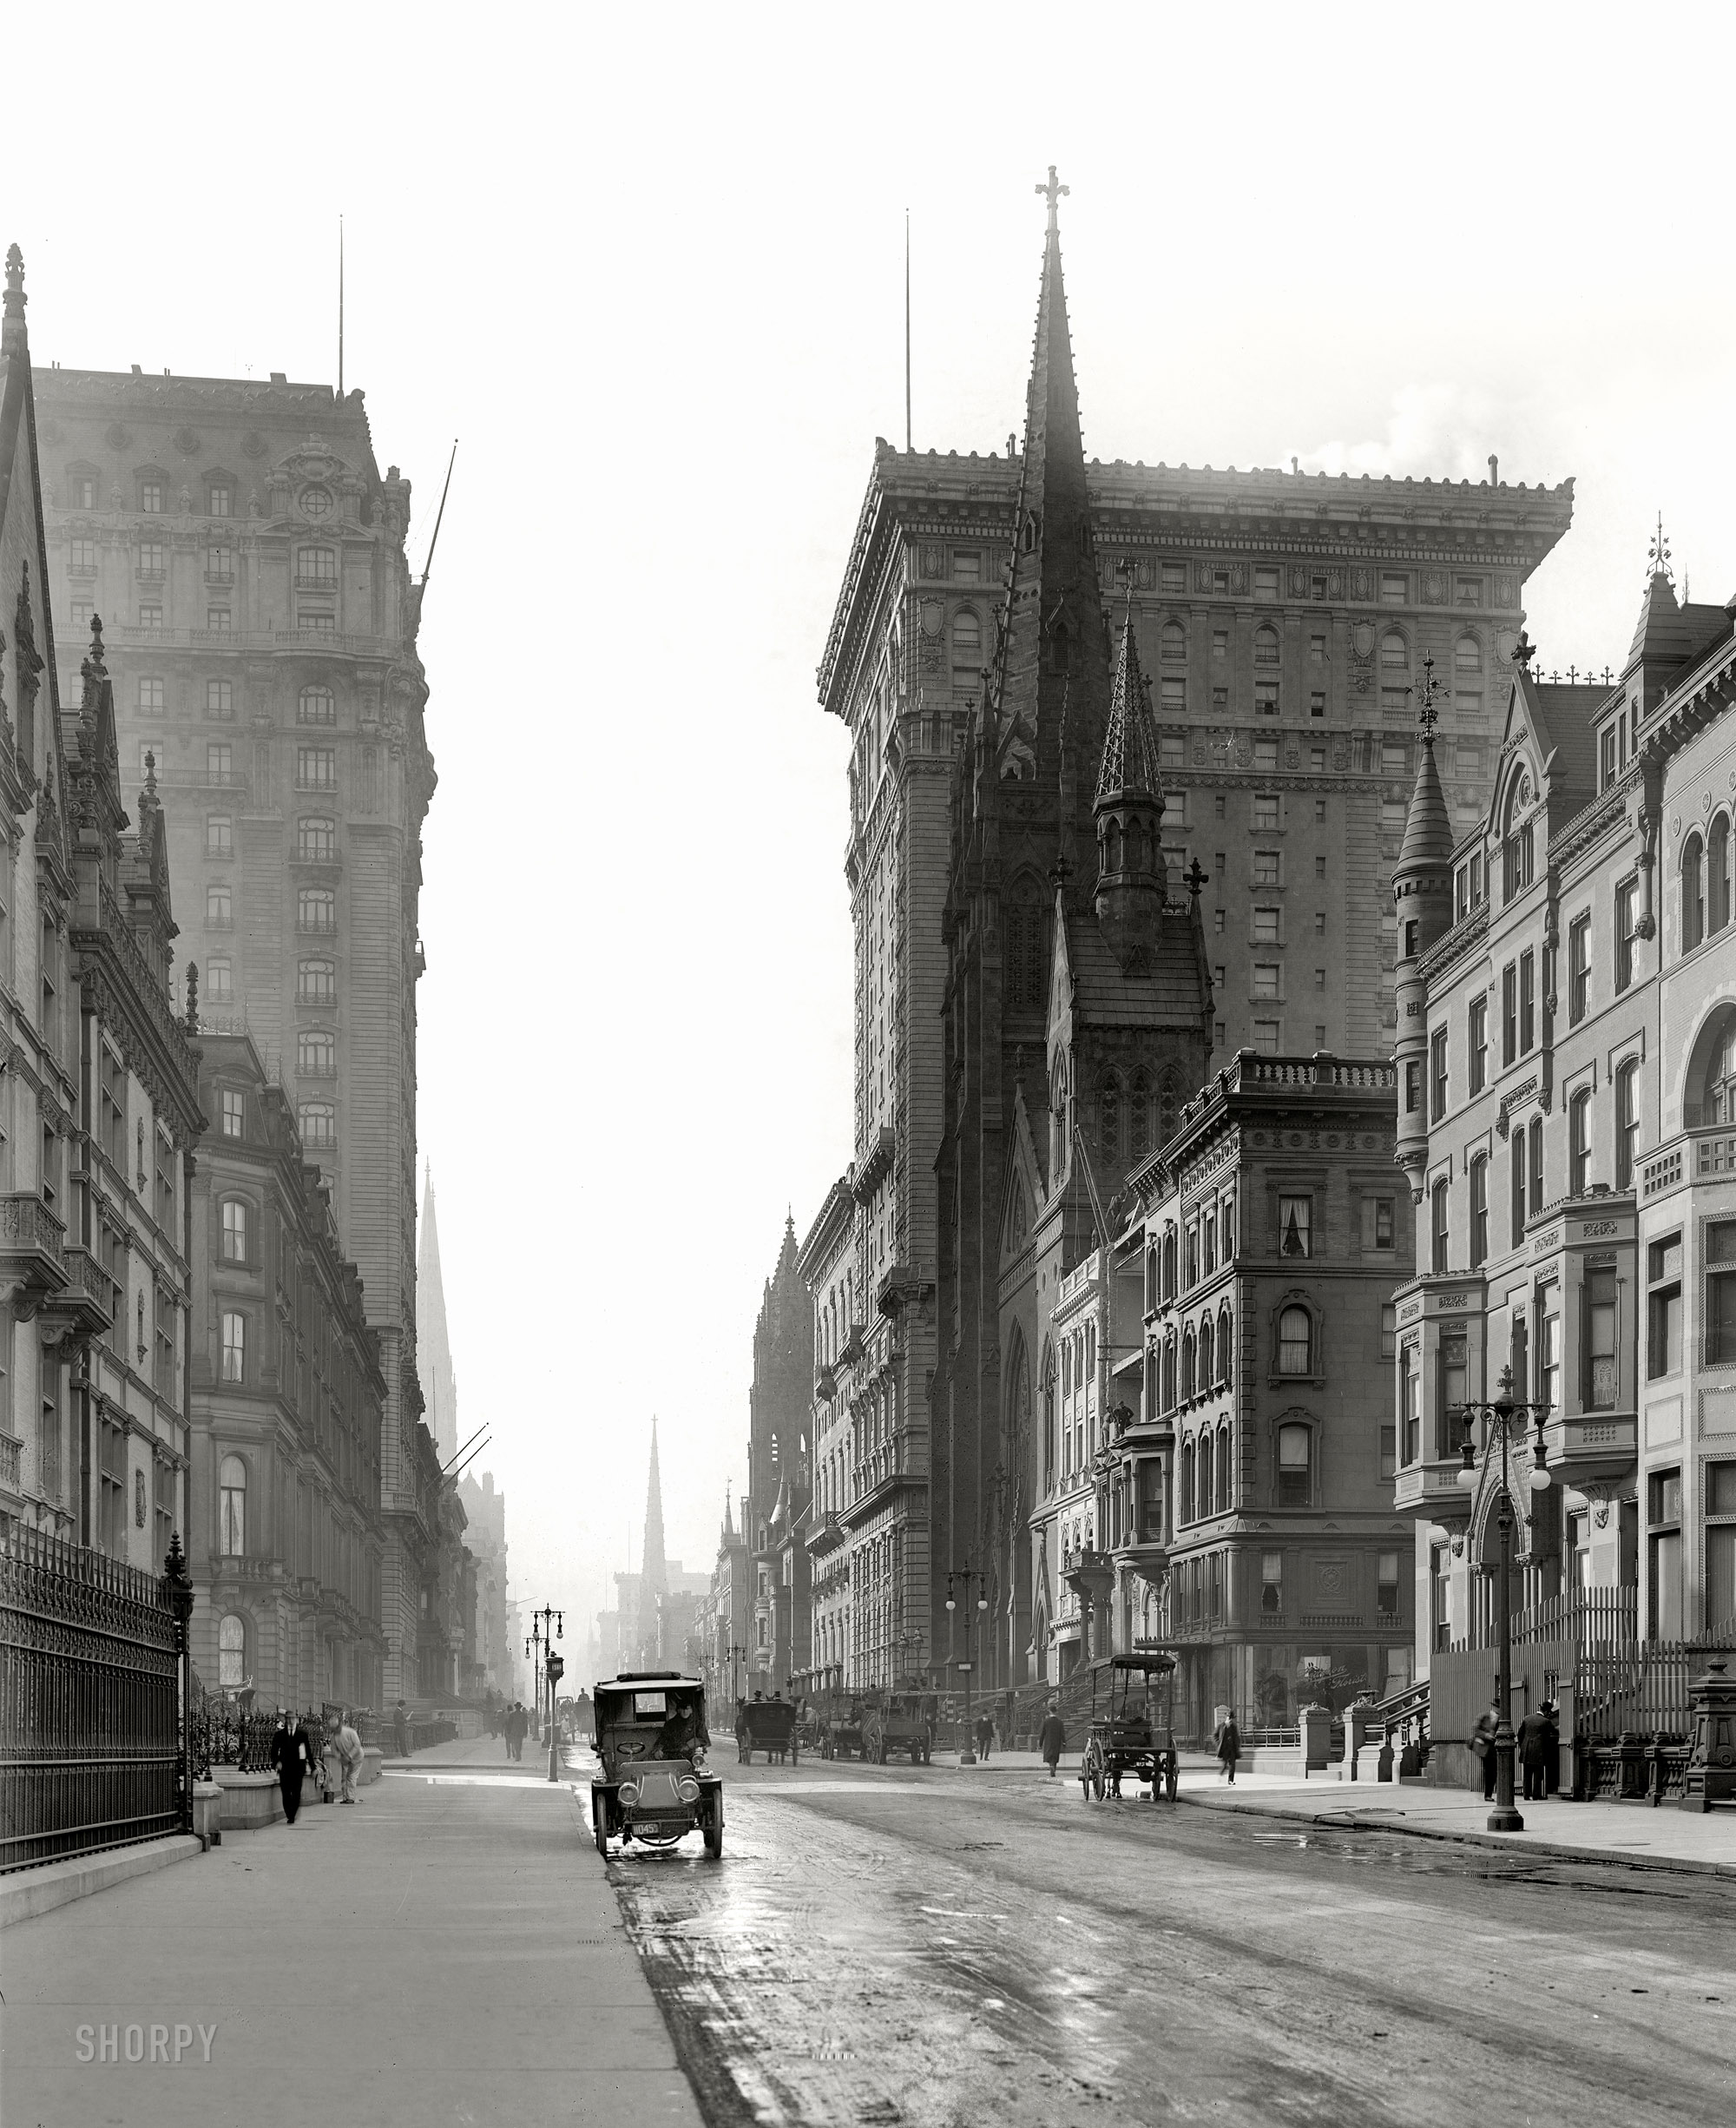 New York circa 1905. "Gotham and St. Regis hotels." Looking south along Fifth Avenue at East 56th Street. On the right, the Gotham rising behind Fifth Avenue Presbyterian Church. Detroit Publishing Company glass negative. View full size.